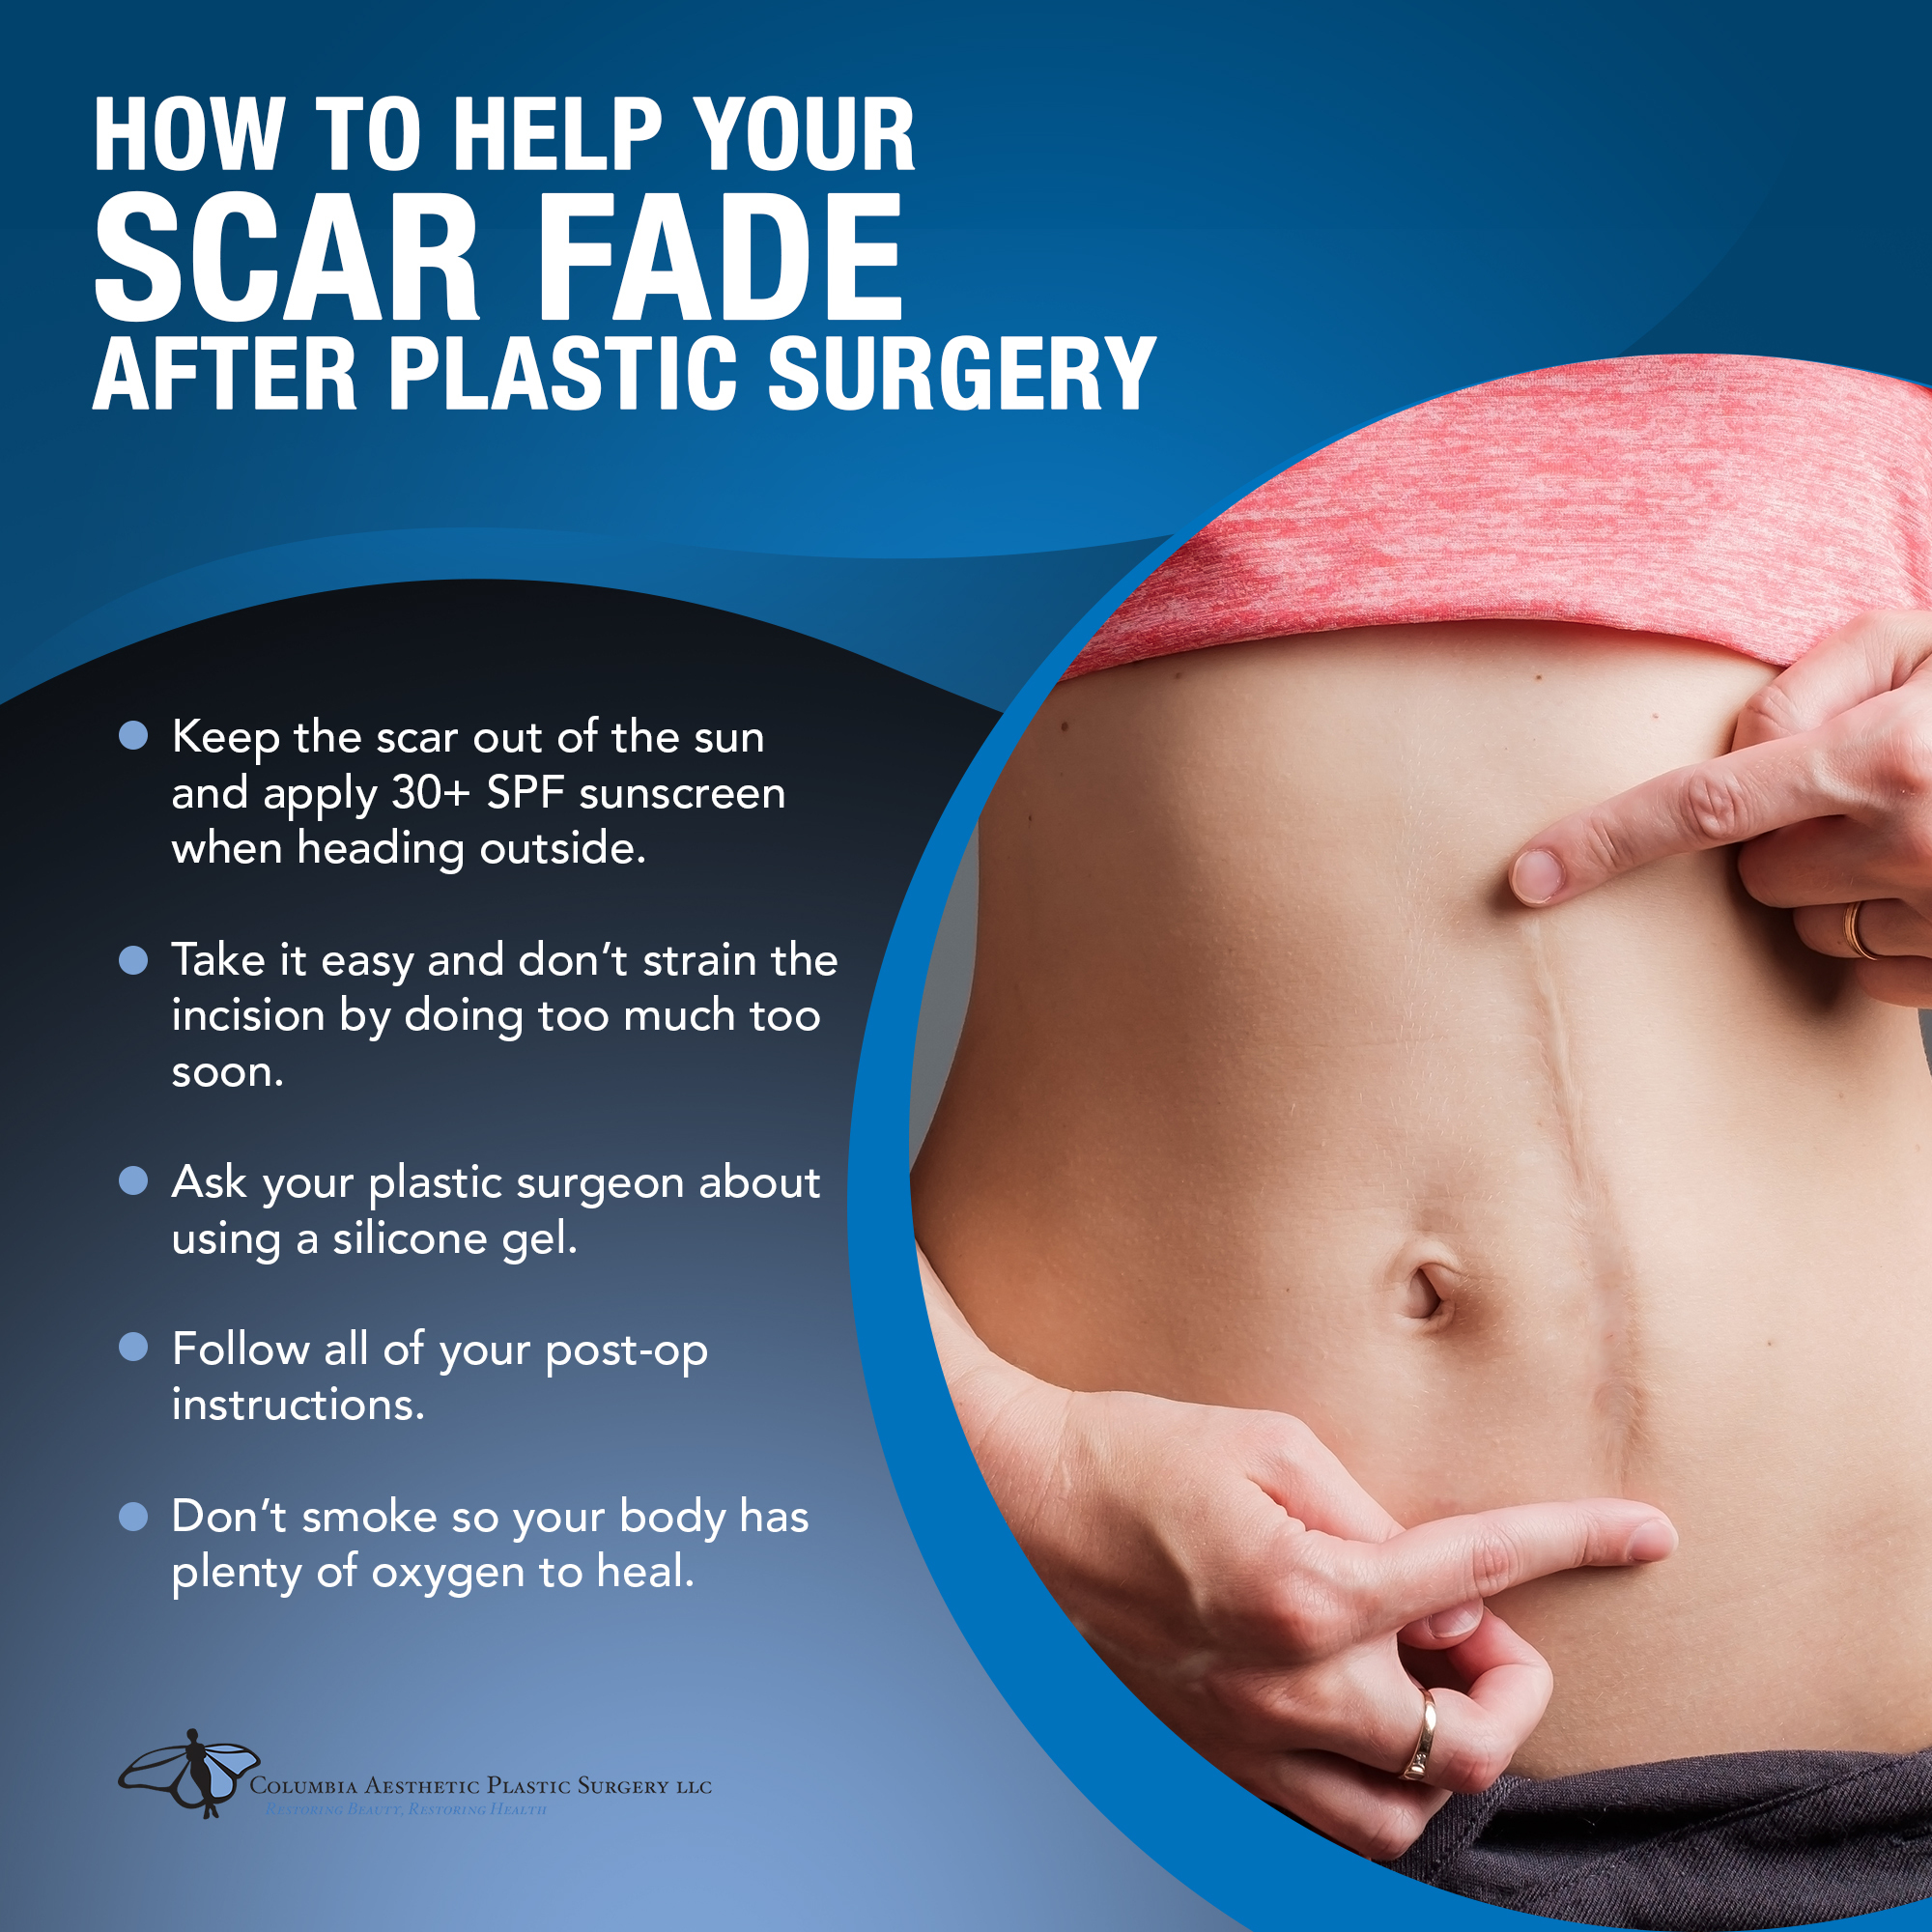 How To Help Your Scar Fade After Plastic Surgery [Infographic]